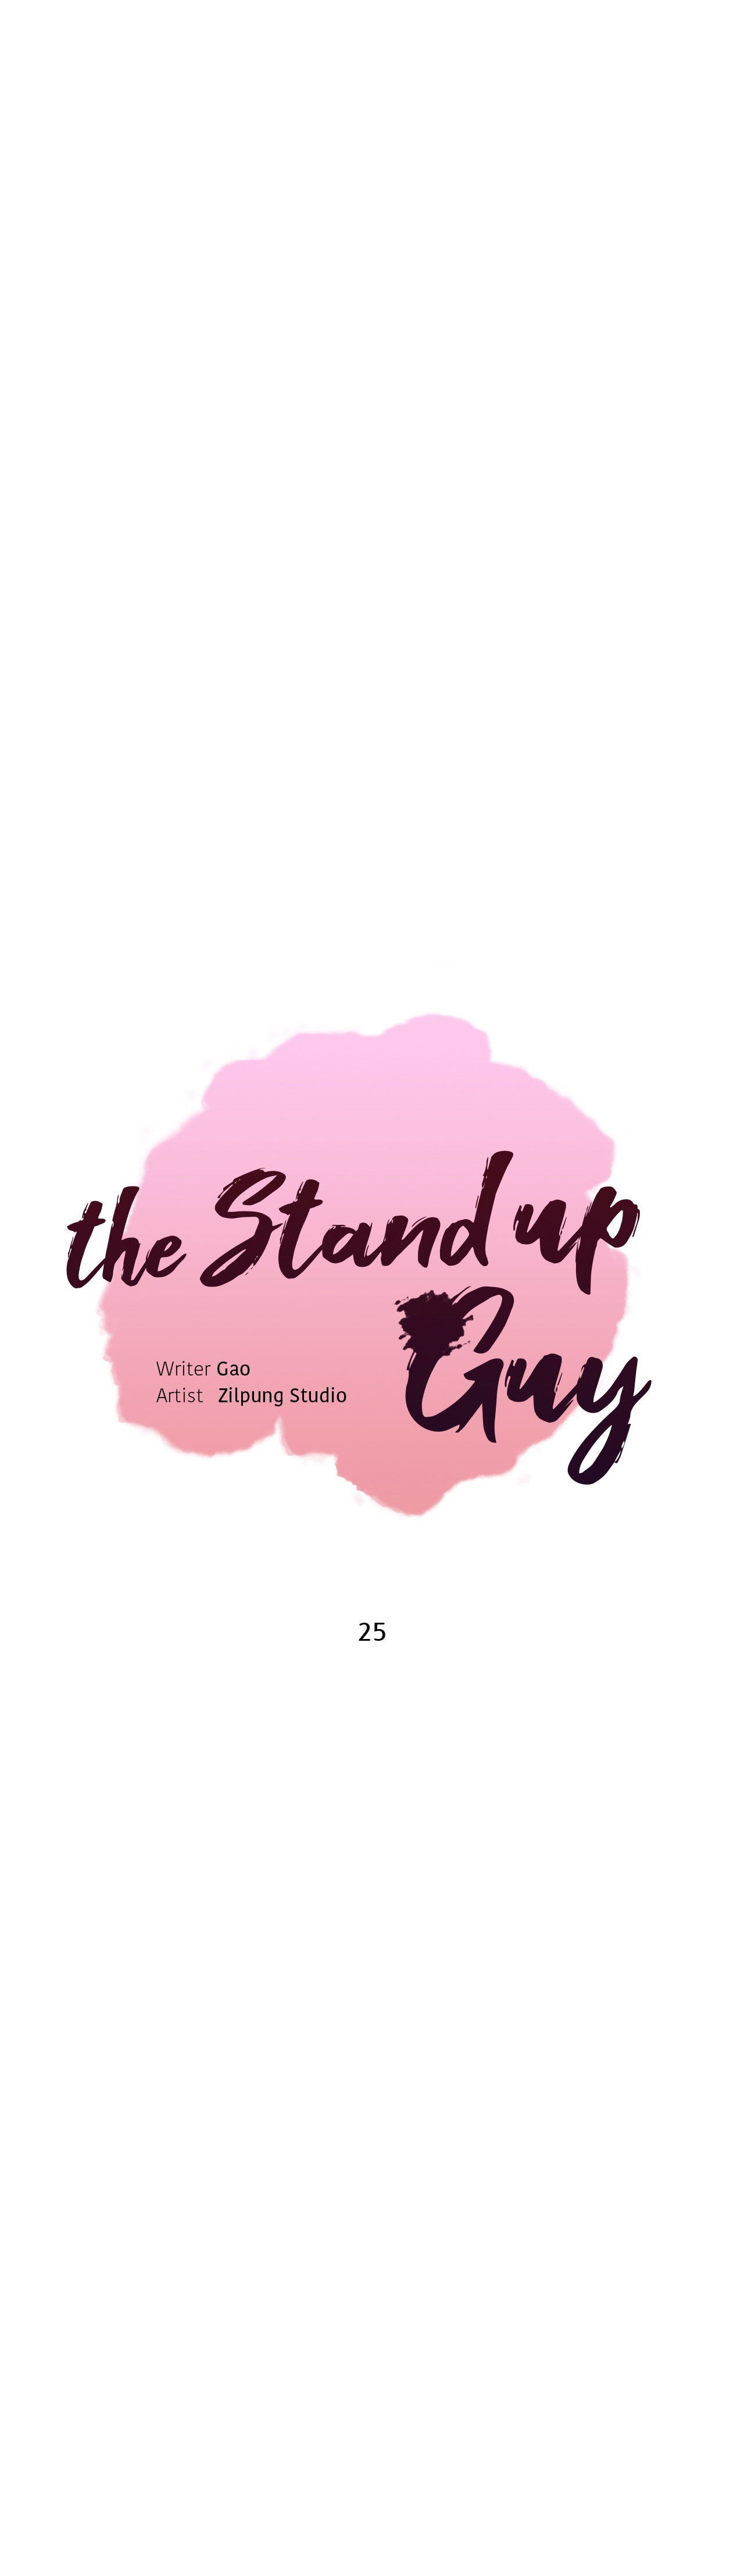 the-stand-up-guy-chap-25-0